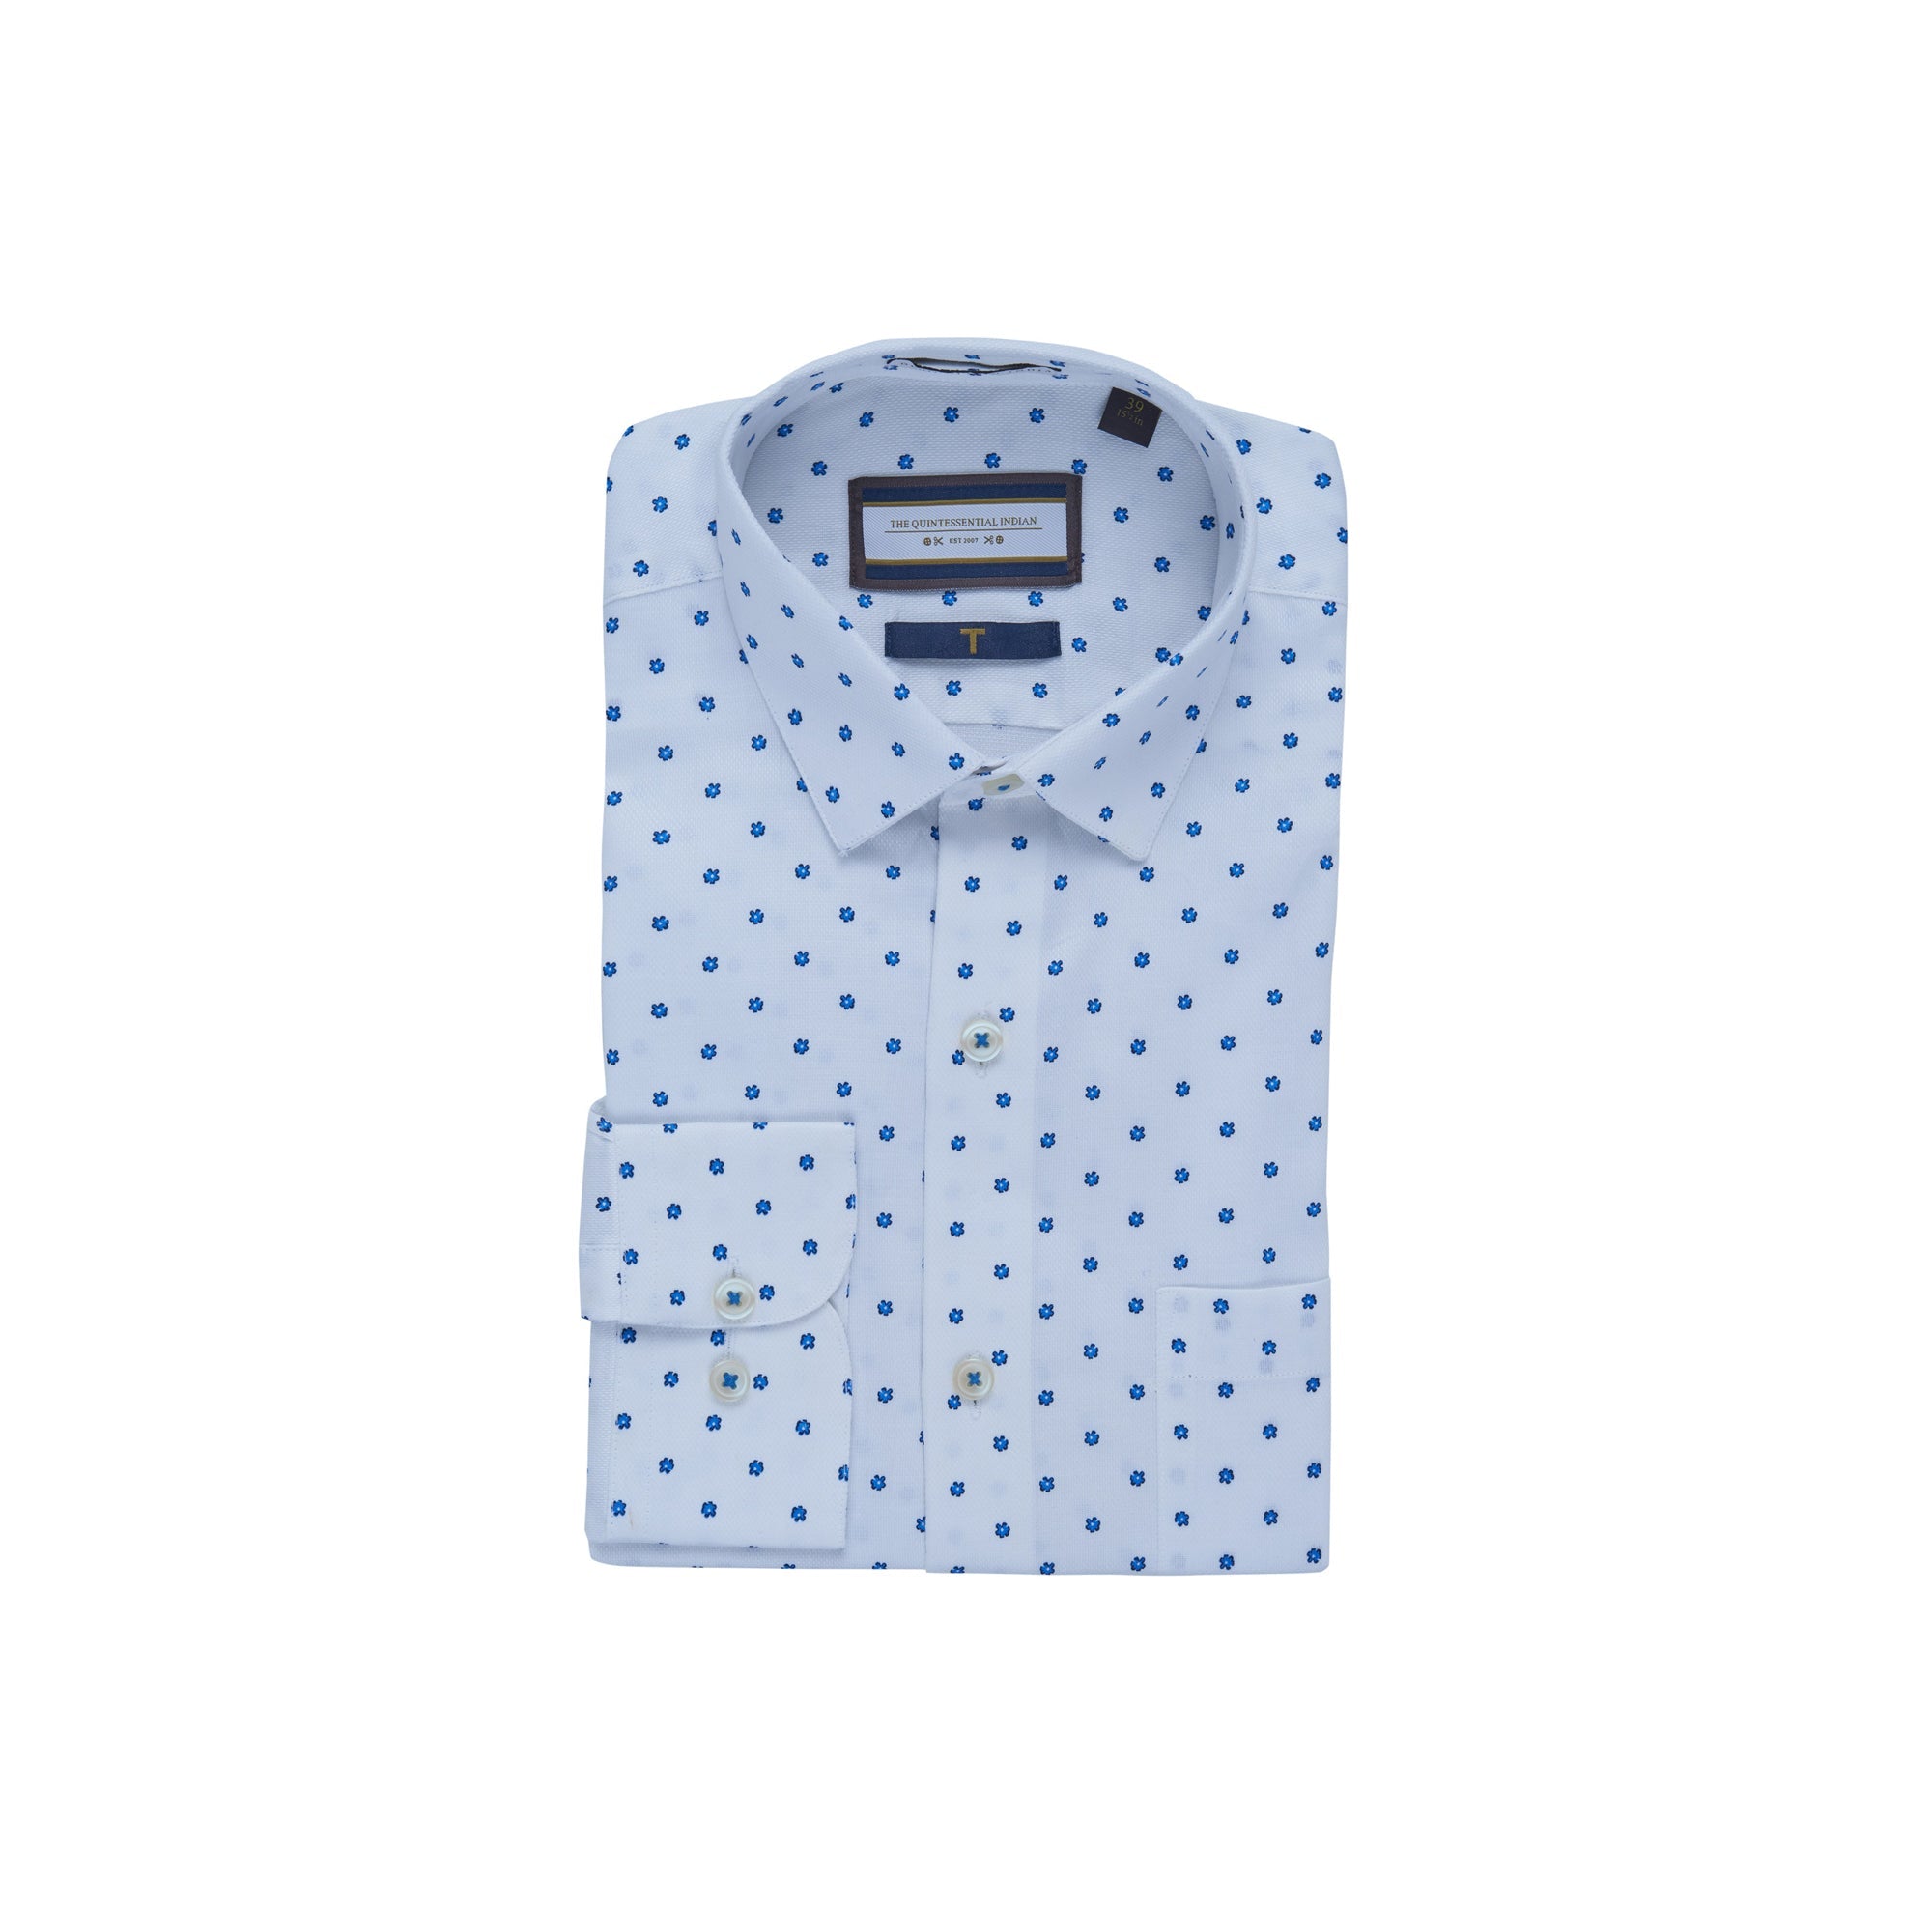 T the brand Blue Floral Ditsy Print Cotton Slim fit Shirt with Full-Sleeves - White